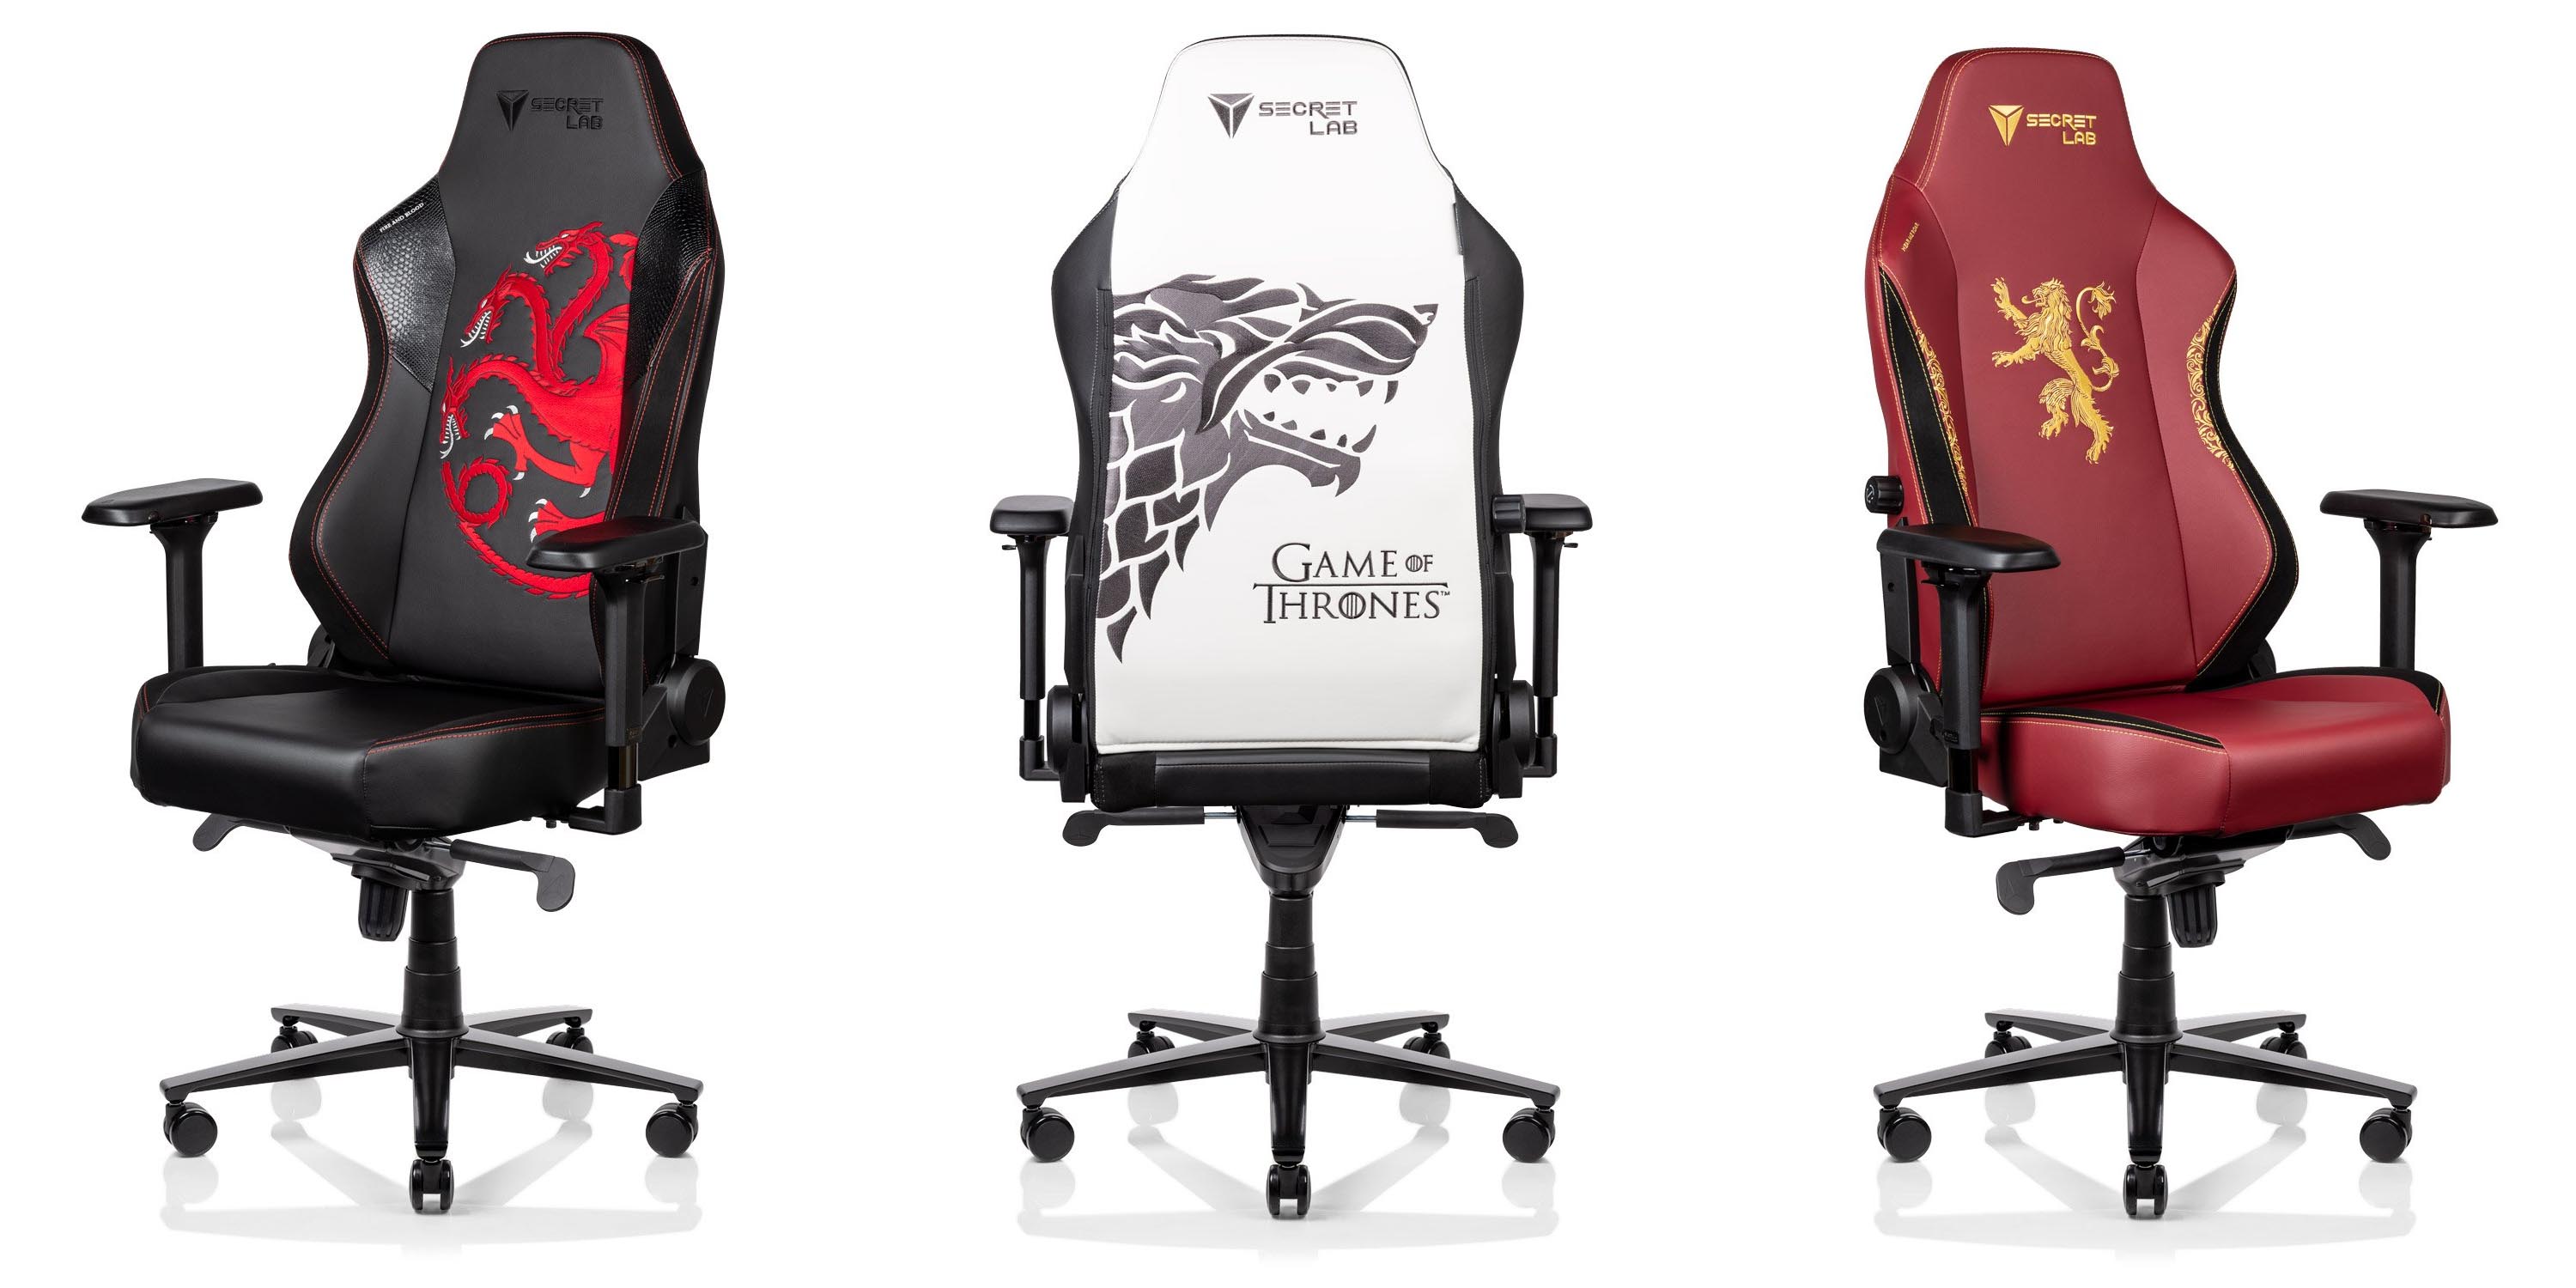 Simple Gaming Chair Secretlab Review for Small Space